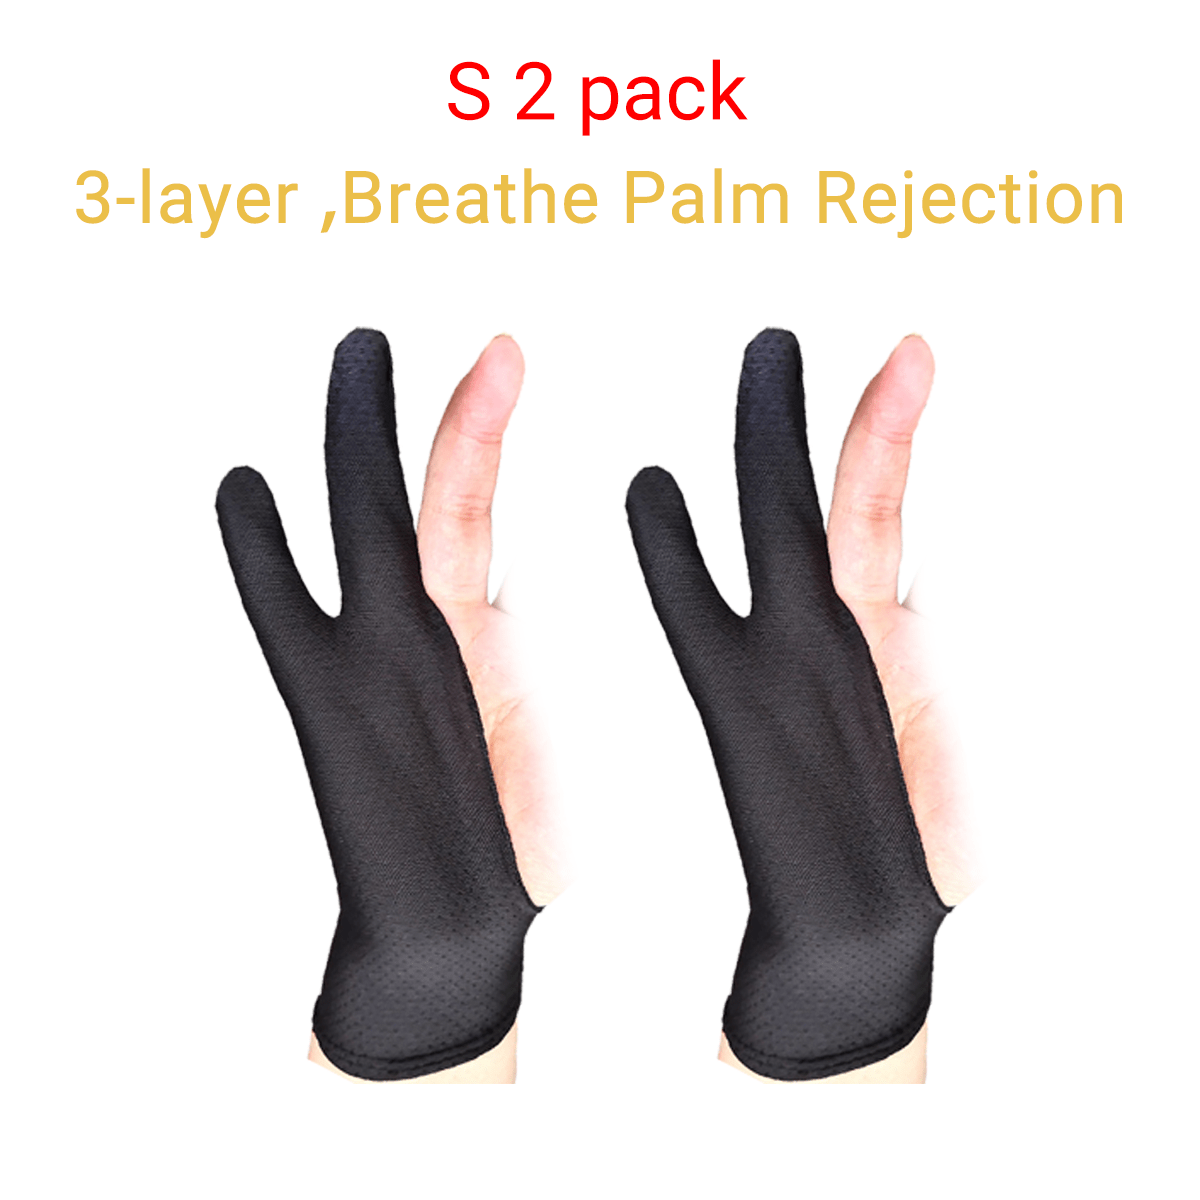 1 Pack Of Black Two Finger Artist Gloves, Used For Painting, Graffiti,  Sketching, Oil Painting Writing, Art Students Use Digital Board Anti-touch  Writ